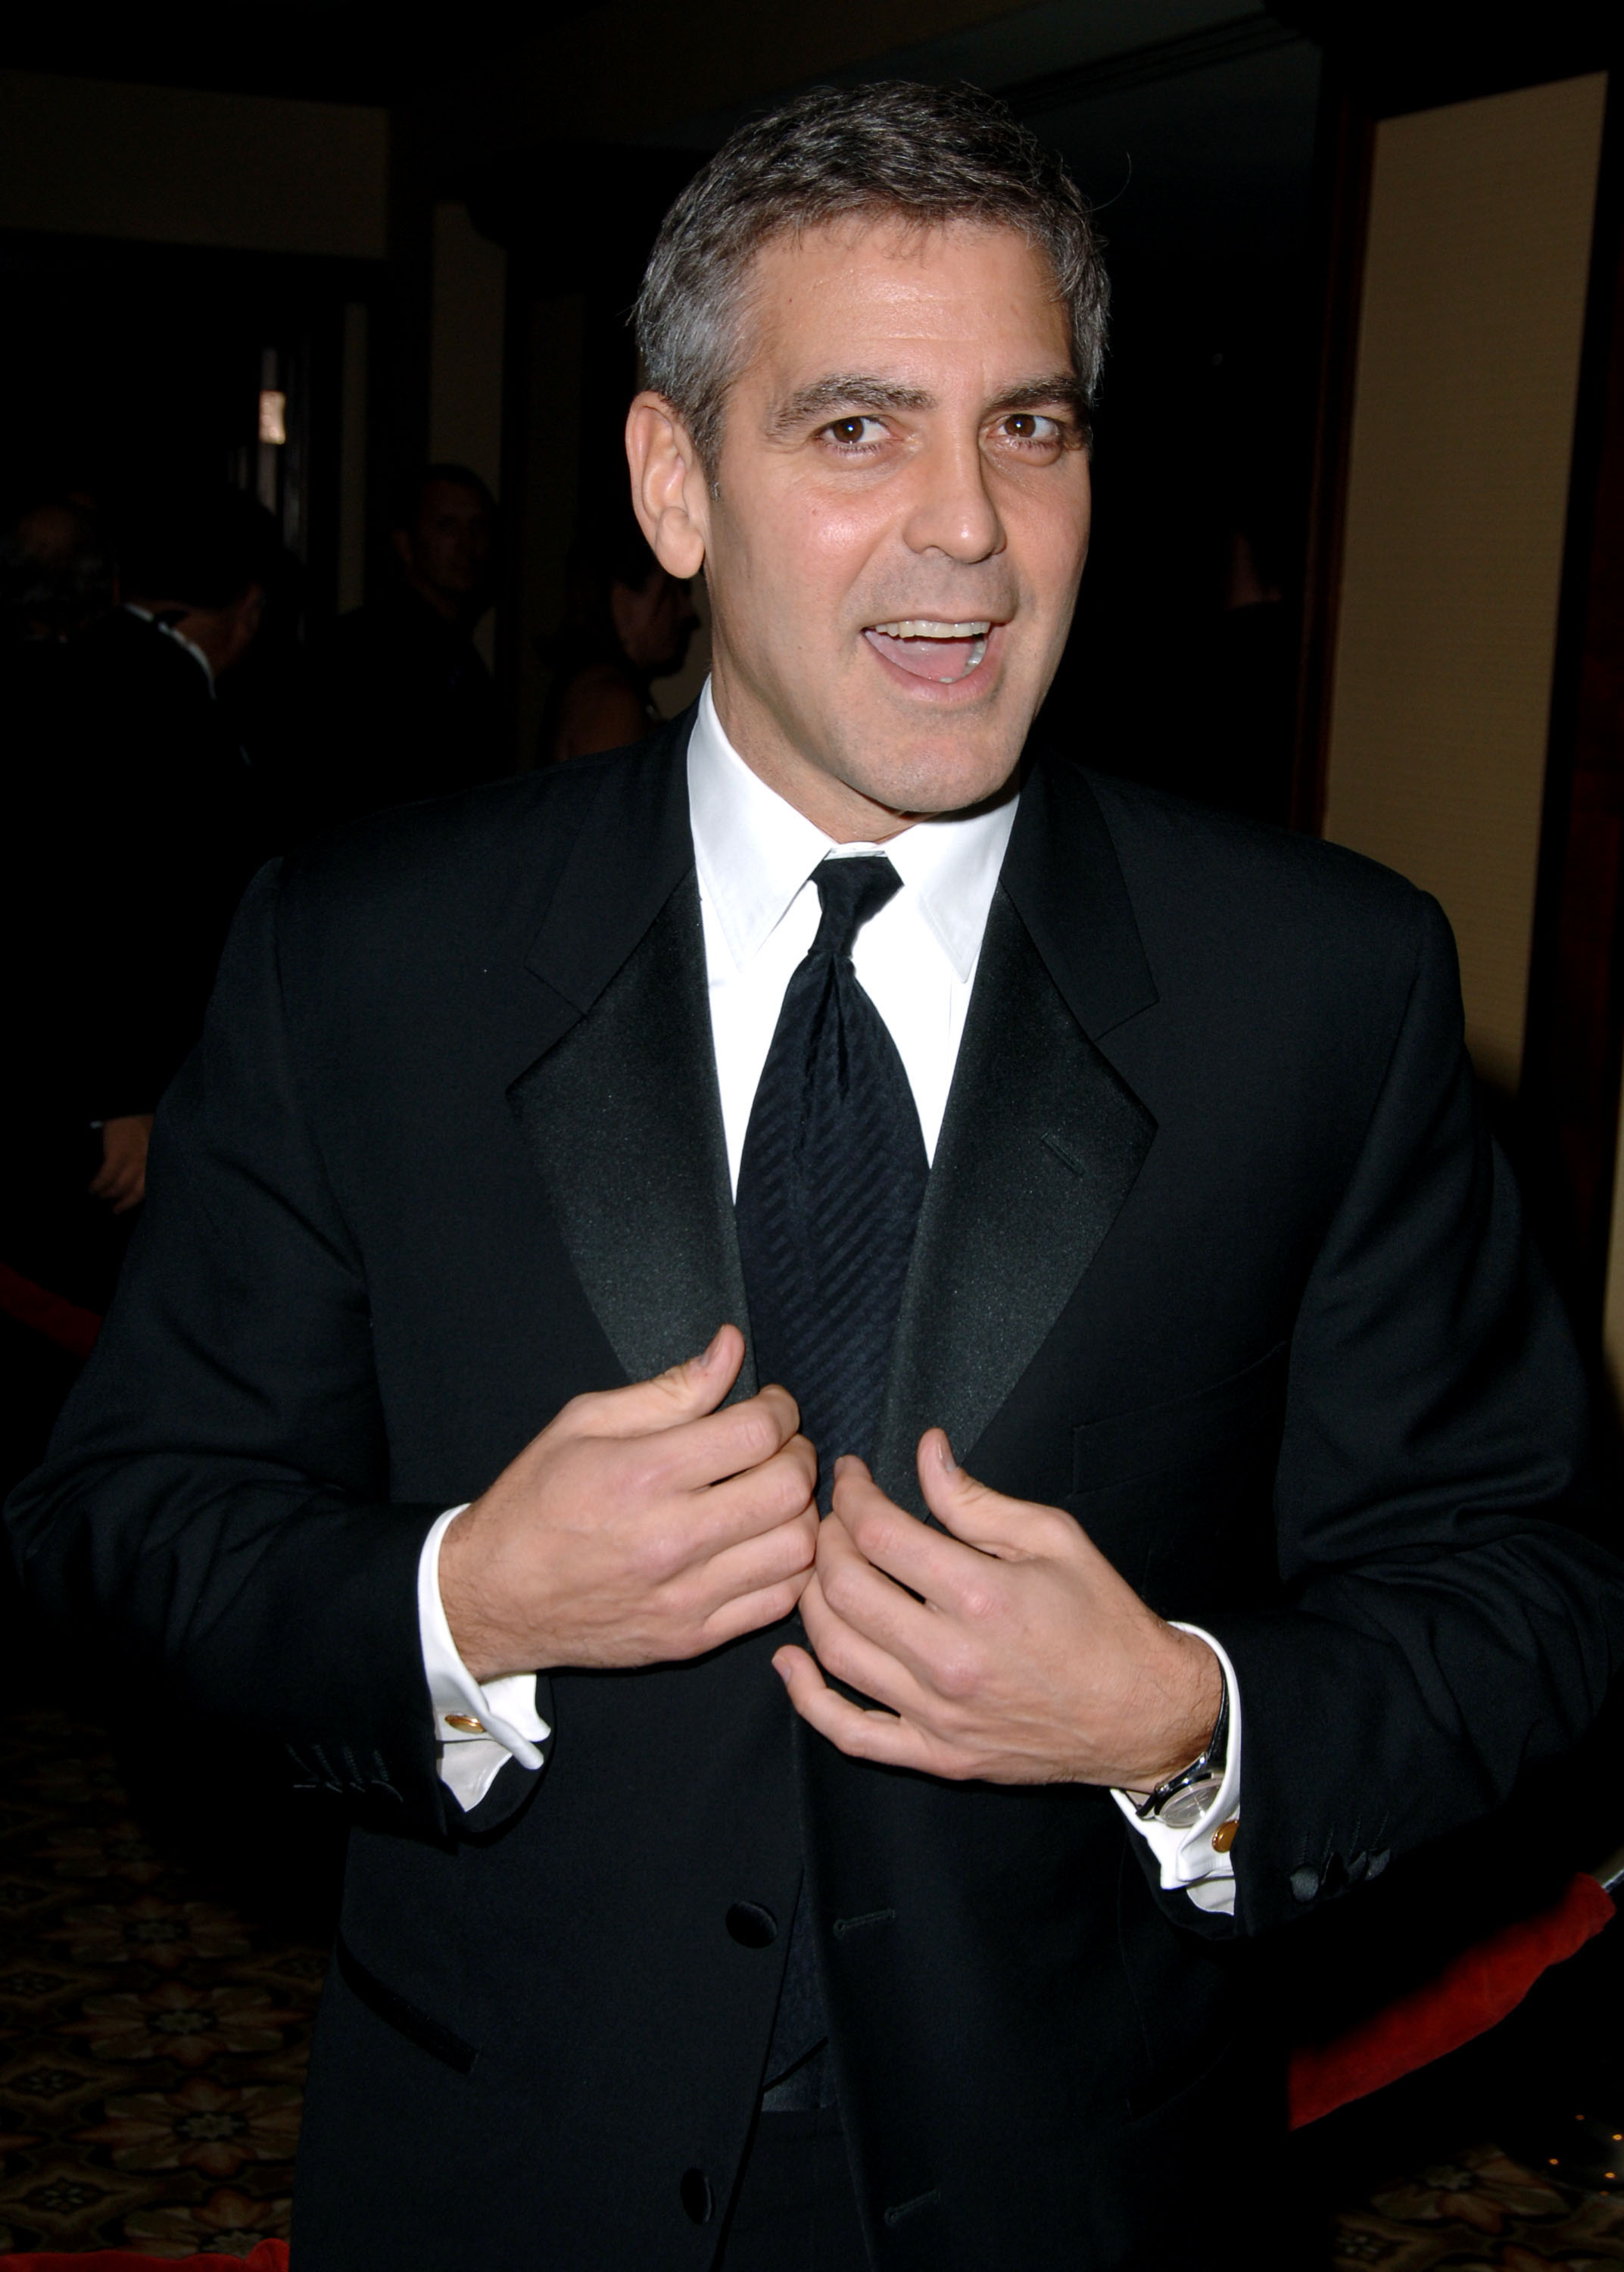 George Clooney at the 58th Annual Directors Guild of America Awards in Century City, California in 2006 | Source: Getty Images